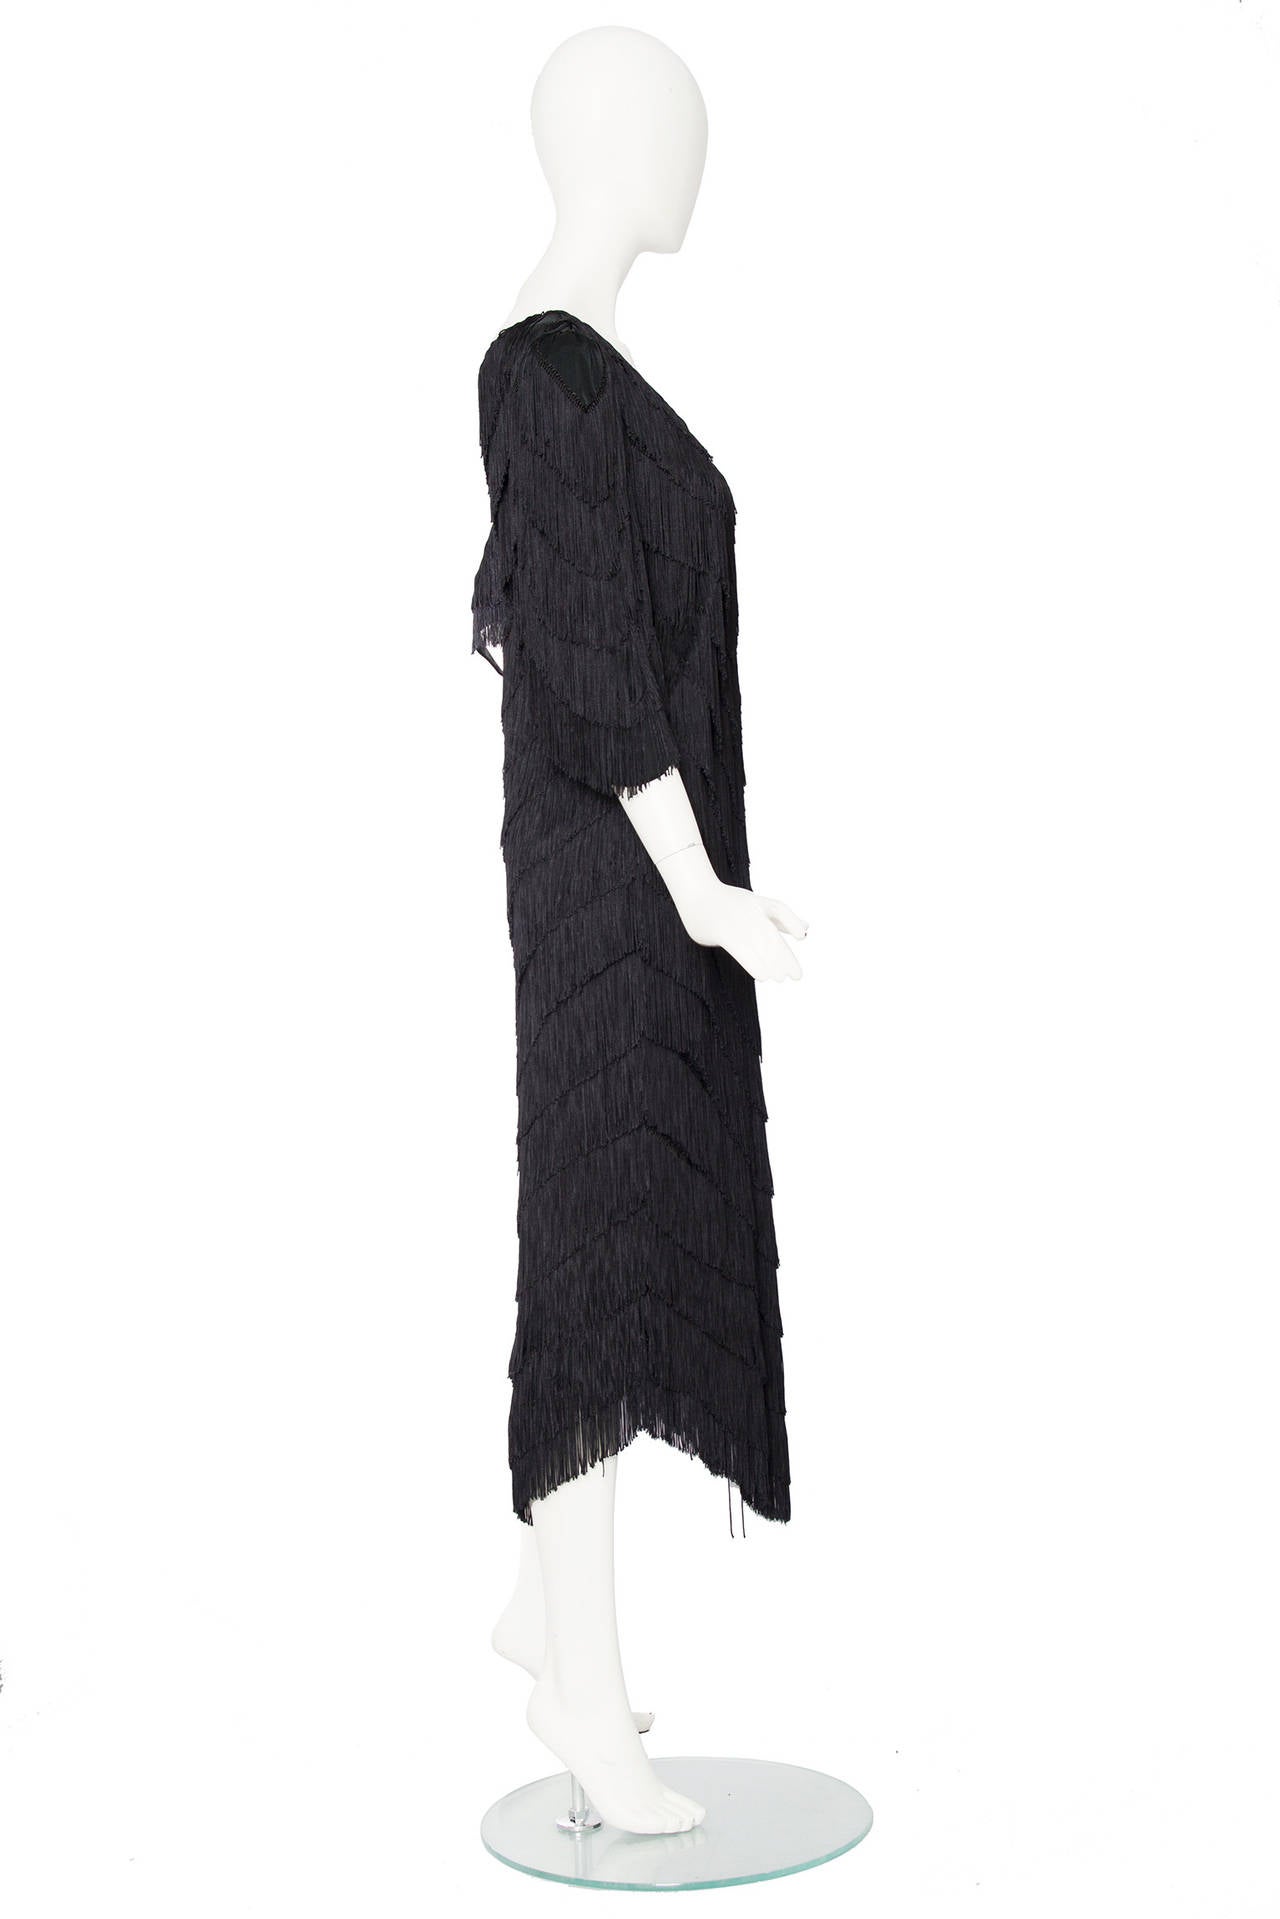 A 1980s Norma Kamali black fringe dress with an asymmetrical hemline and fringe detailing. The neckline and hem ascends into a triangular shape matching the fringe. The three quarter length sleeves have slight volume and the shoulders have small